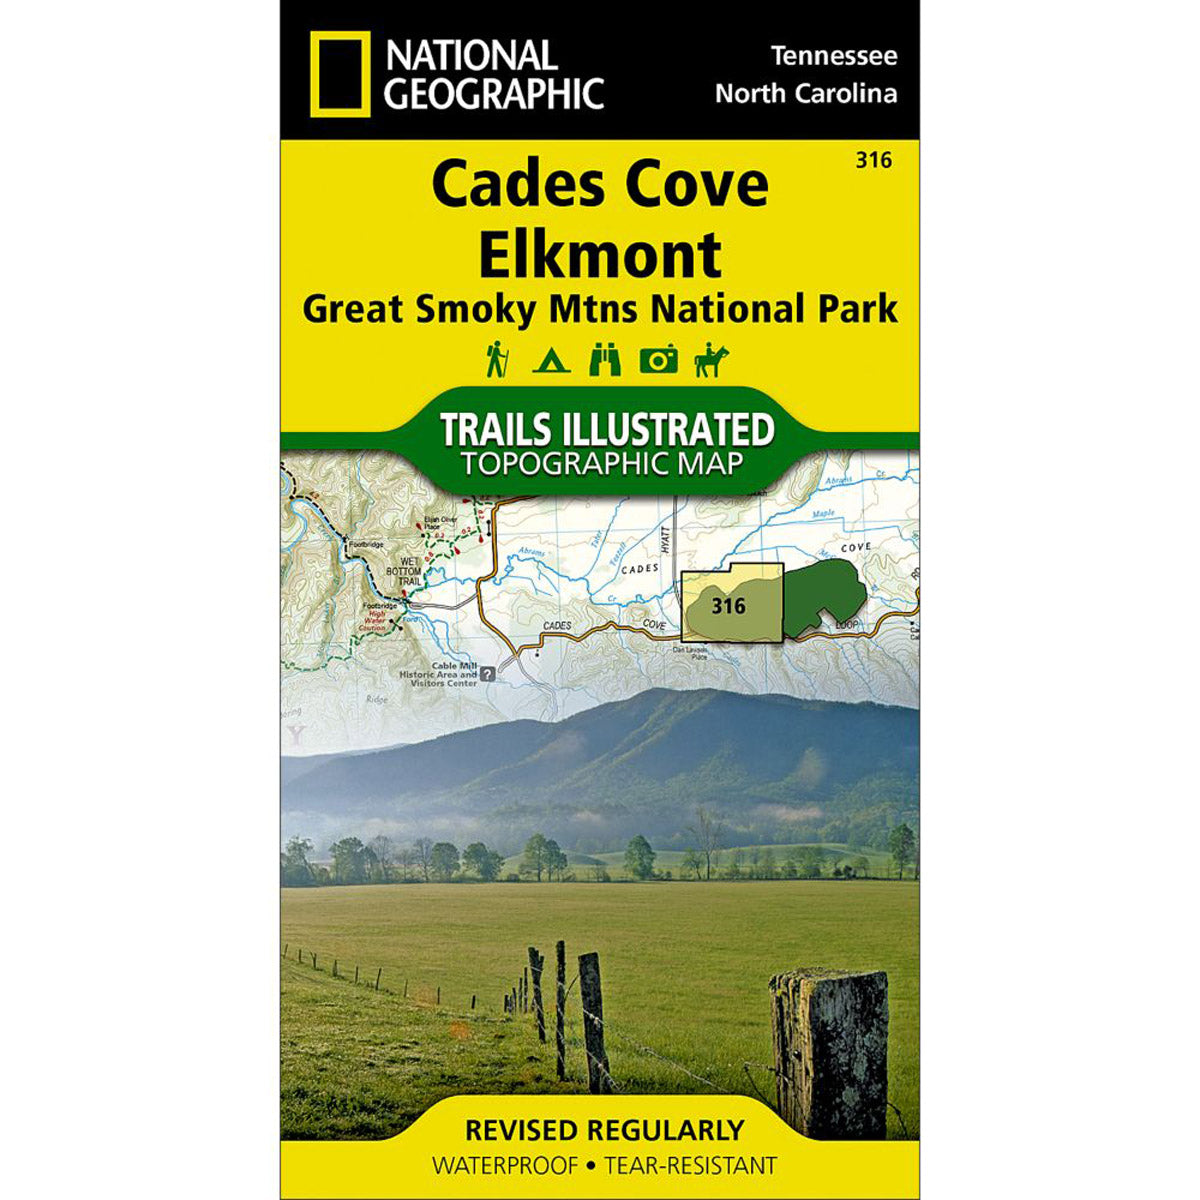 Cades Cove, Elkmont: Great Smoky Mountains National Park Map